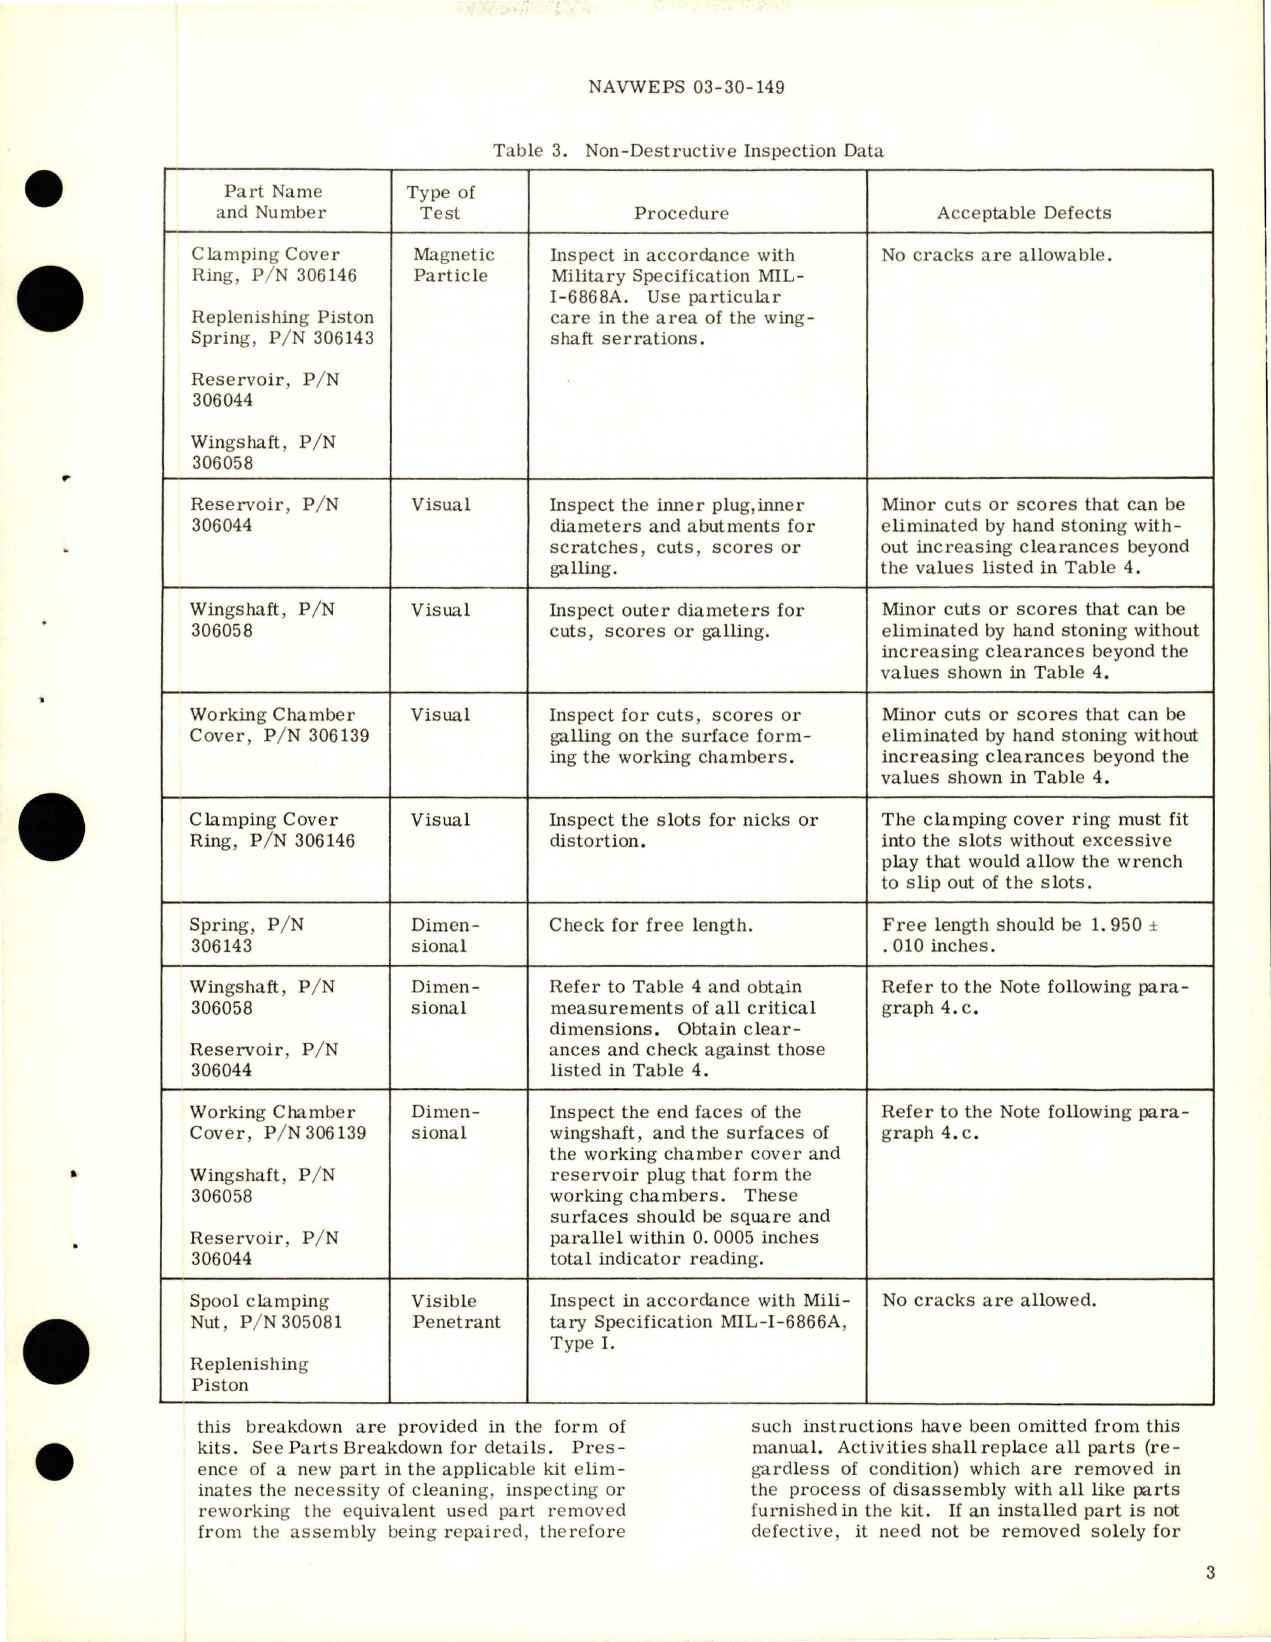 Sample page 5 from AirCorps Library document: Overhaul Instructions with Parts Breakdown for Rudder Flutter Damper - Part 305670-1